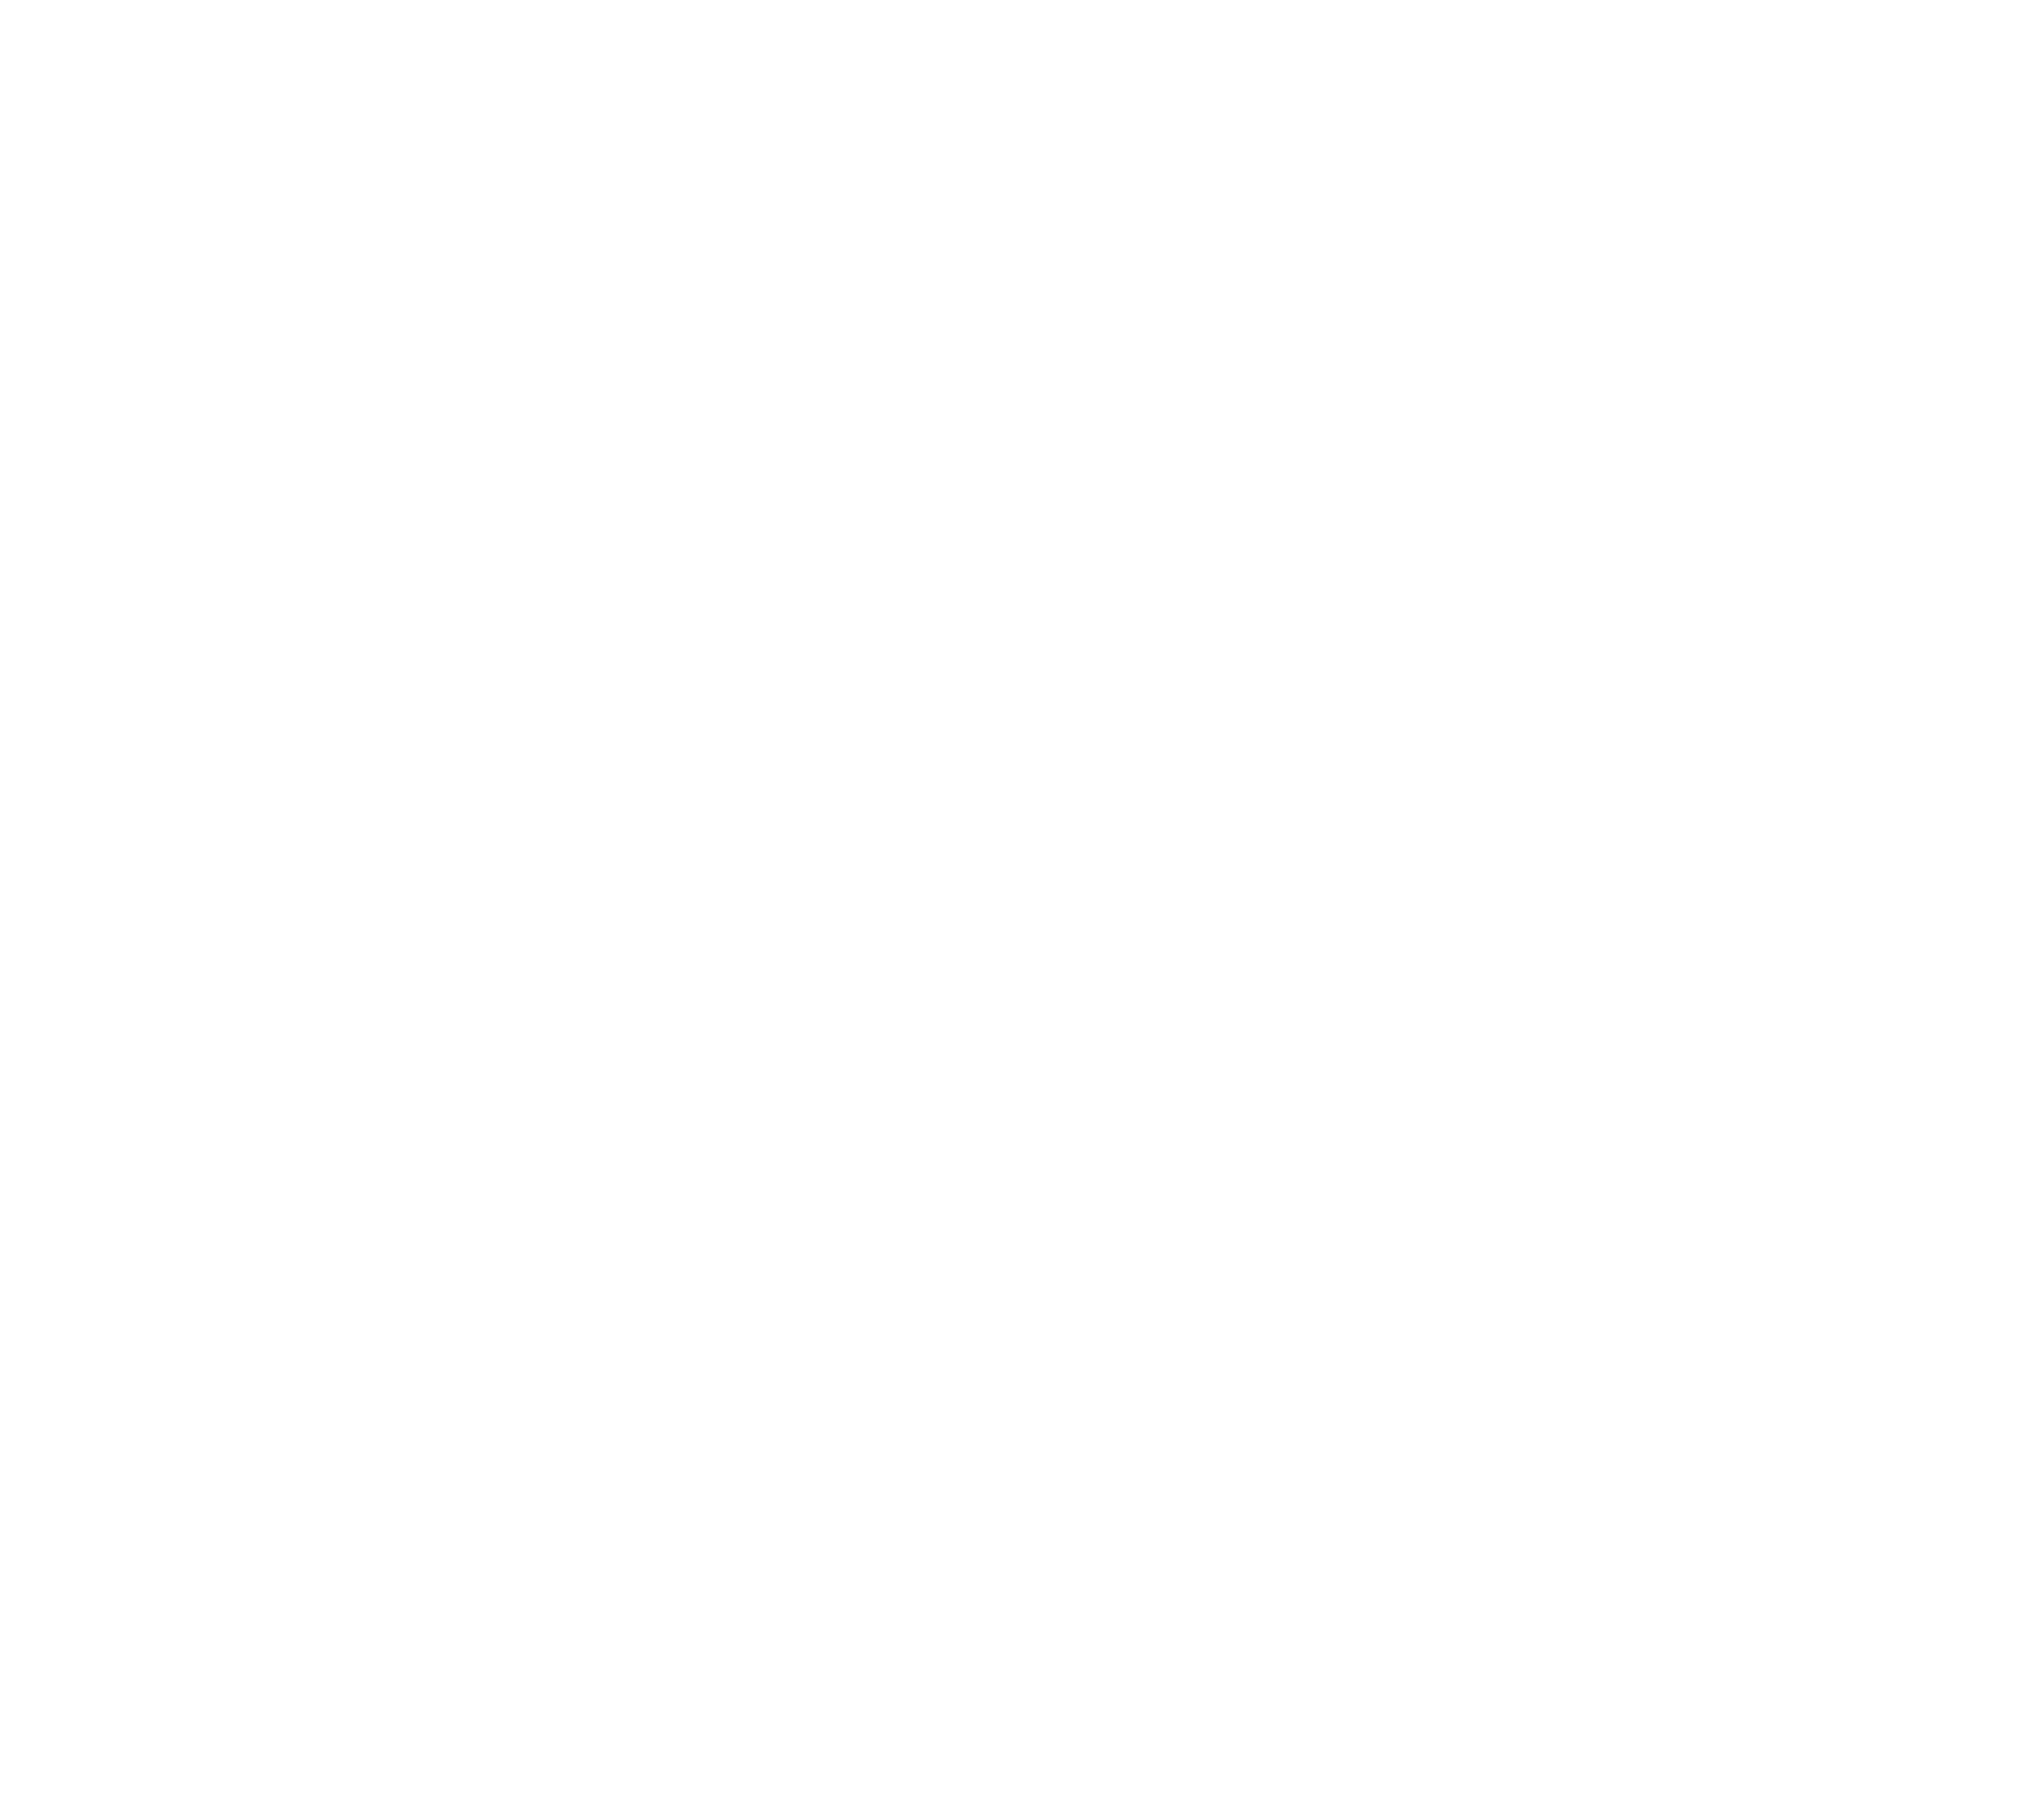 Chambers Crisis & Risk Management 2023